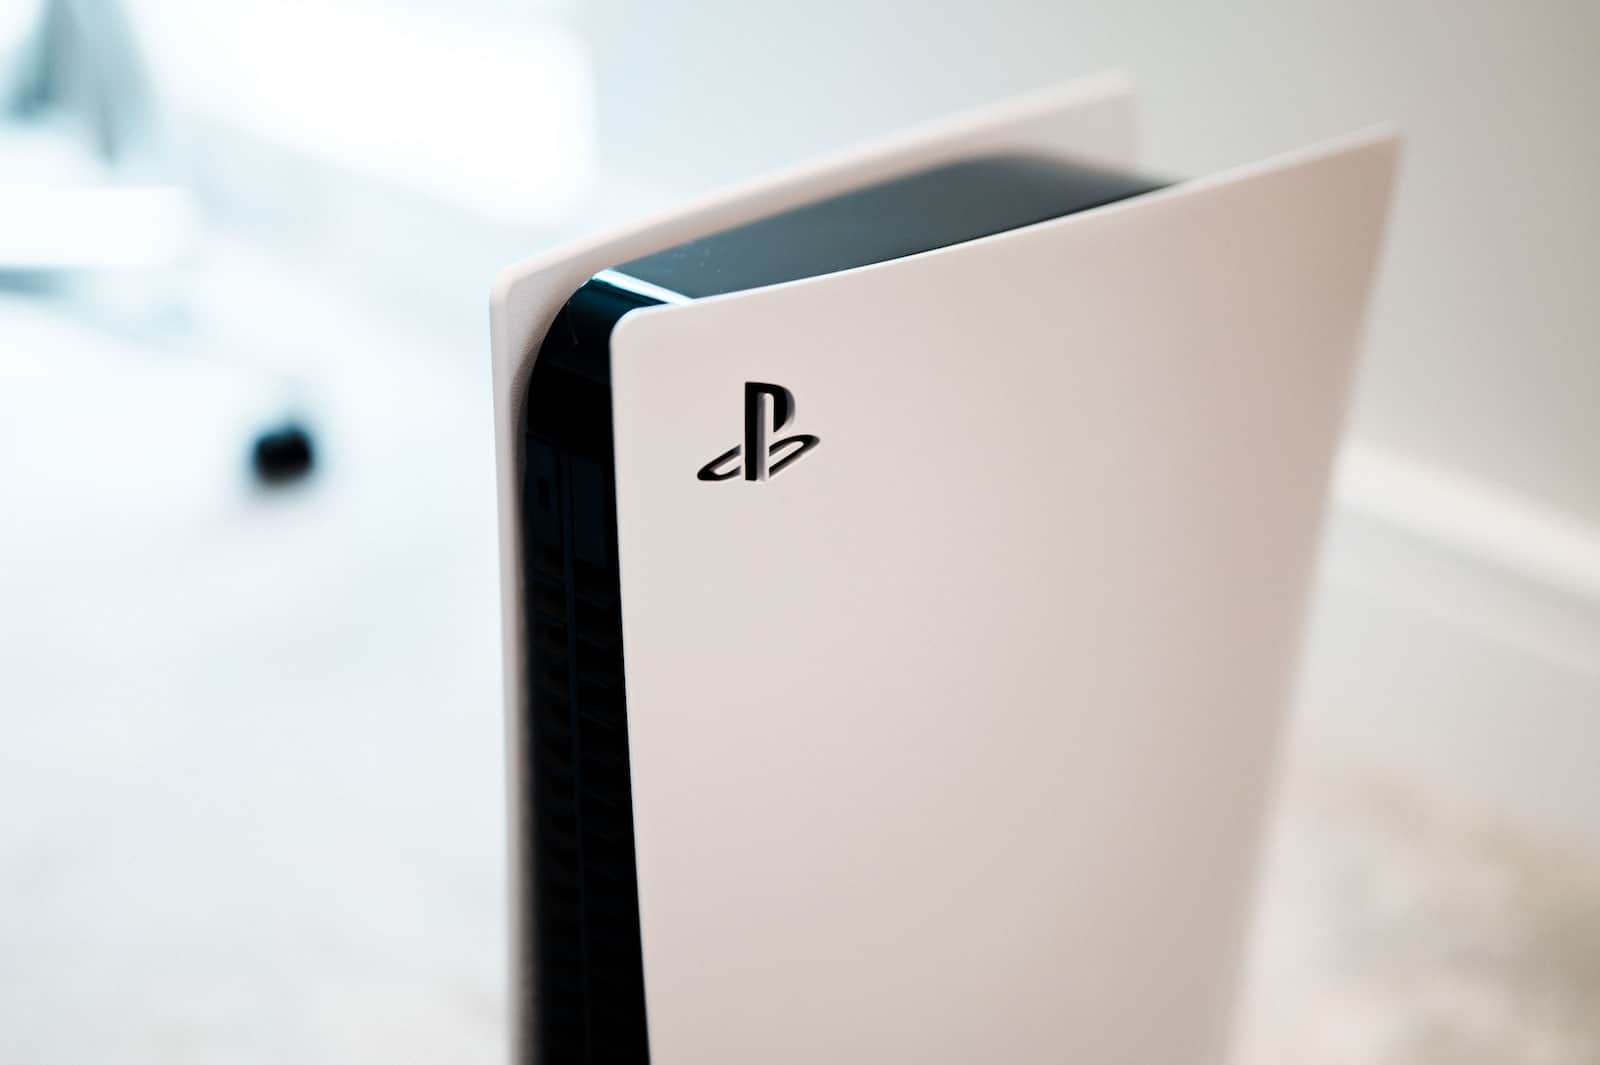 PlayStation 5 Pro: News and Expected Price, Release Date, Specs